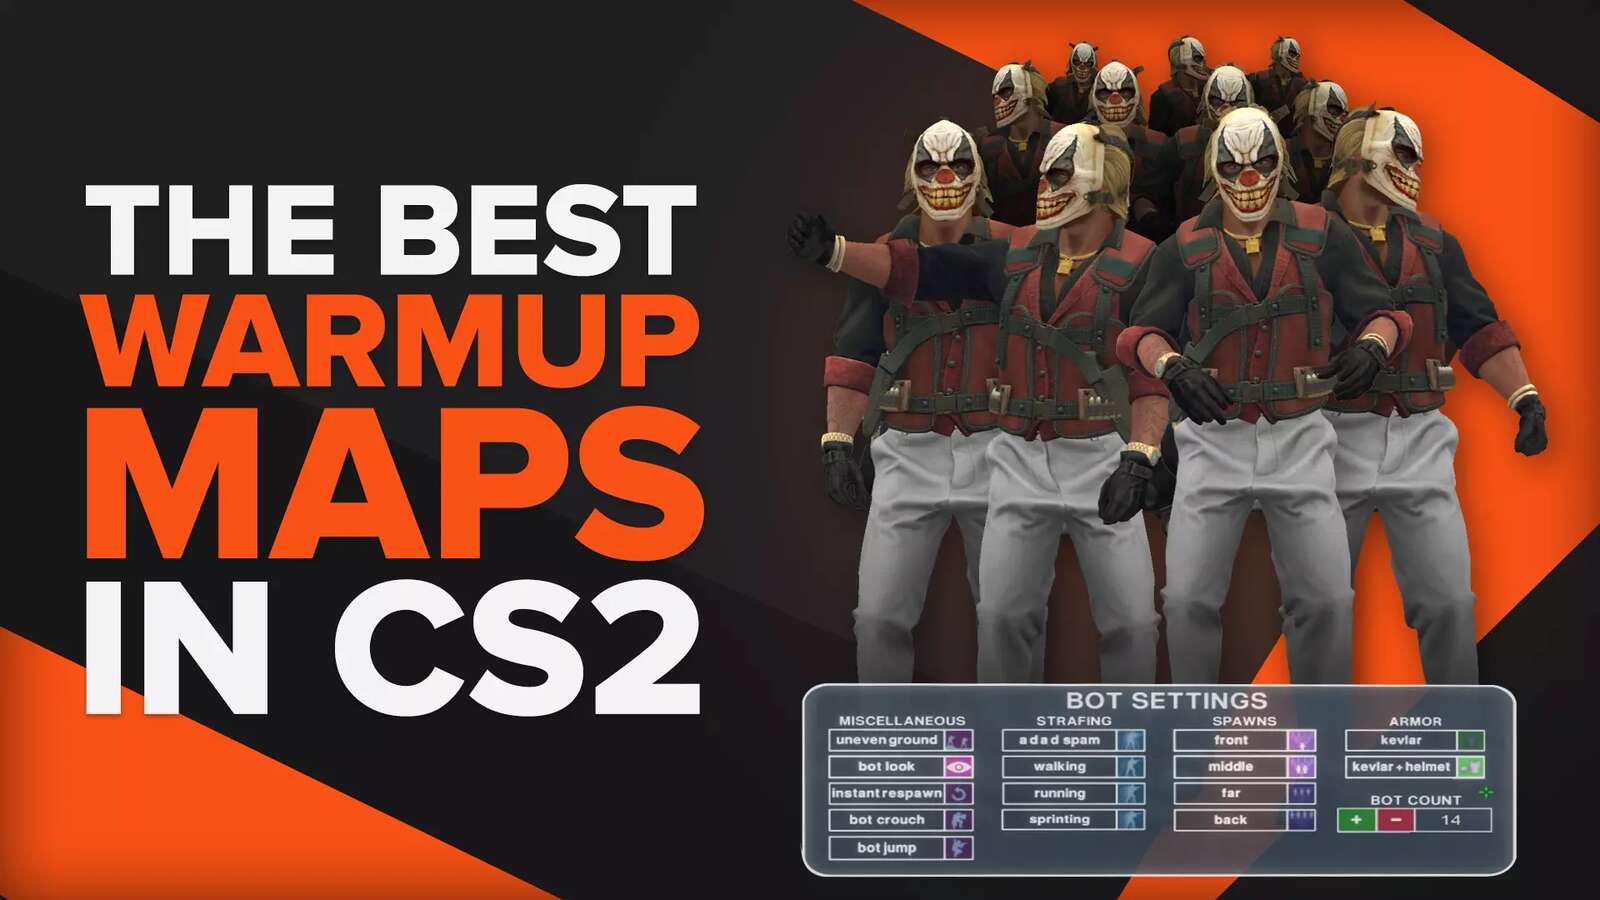 Top 5 Best Warmup Maps In CS2 [Free To Download]